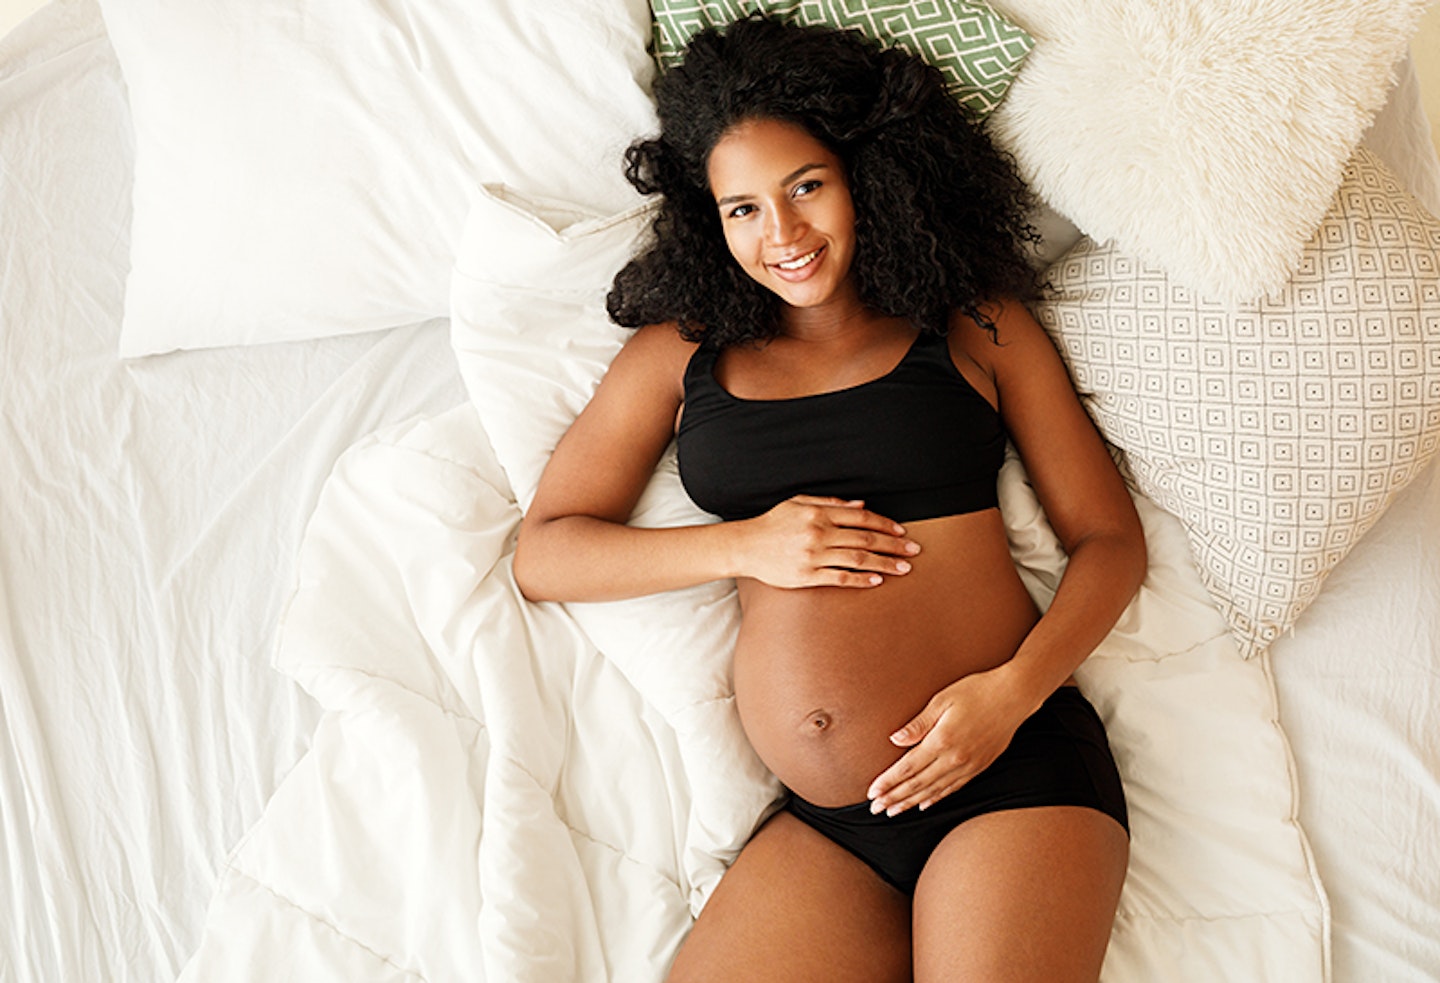 7 brilliant ways to bond with your bump